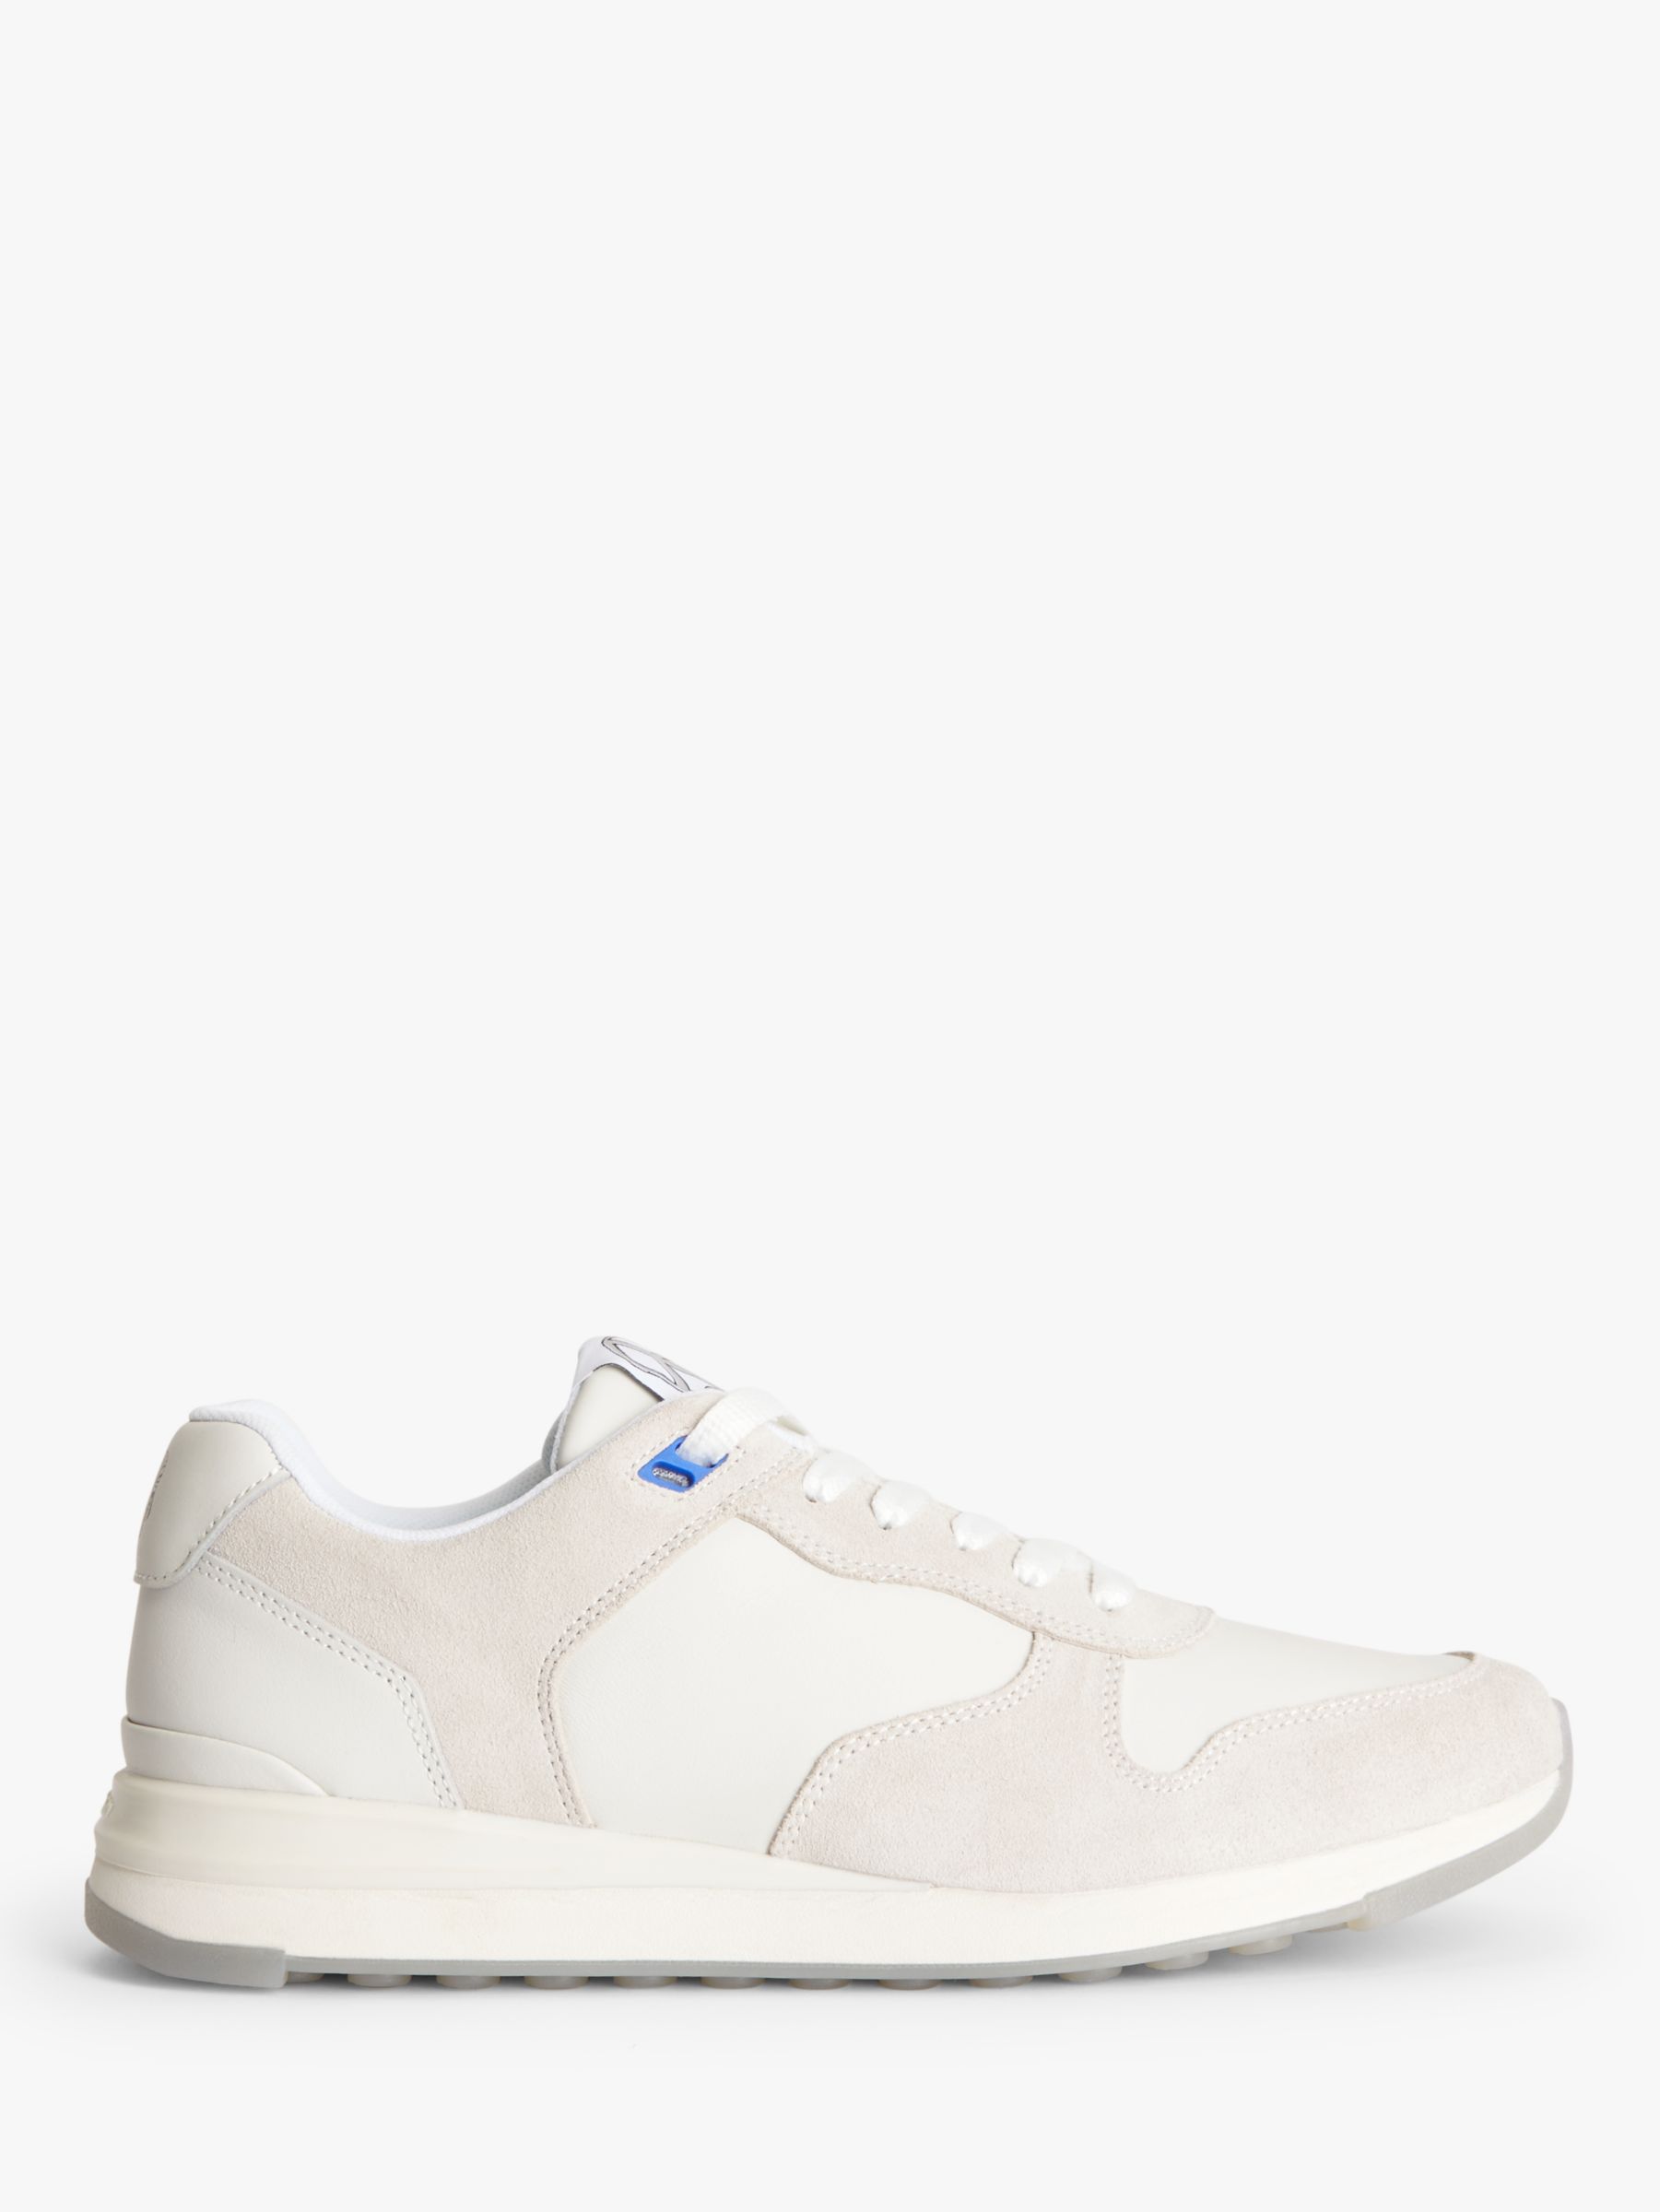 Paul Smith Ware Leather Trainers